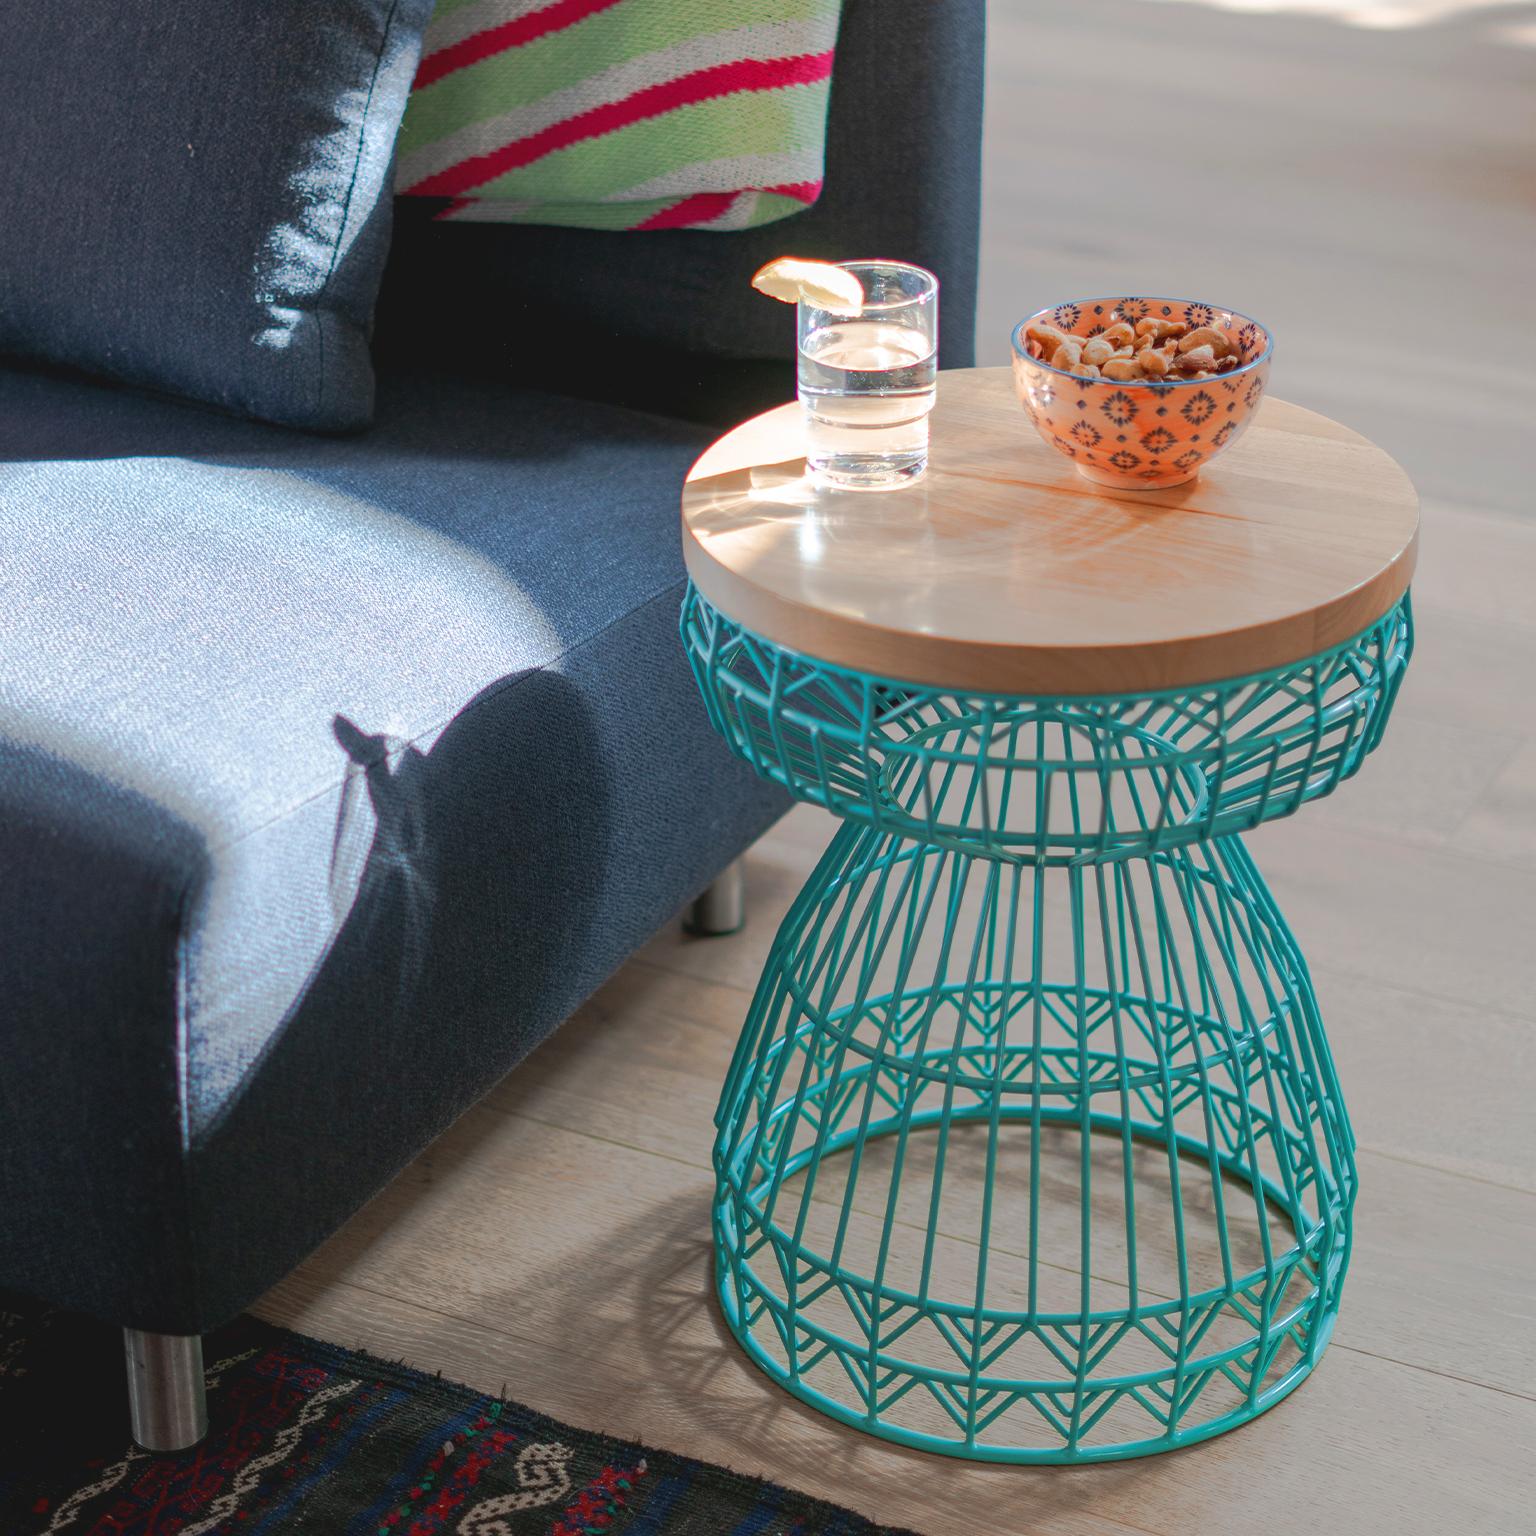 Bend Goods wire furniture
The sweet stool is a modern wire stool with a comfortable wooden seat. The low profile makes it an ideal wire stool for high volume commercial settings, but the intricate design doesn't sacrifice style or personality. A